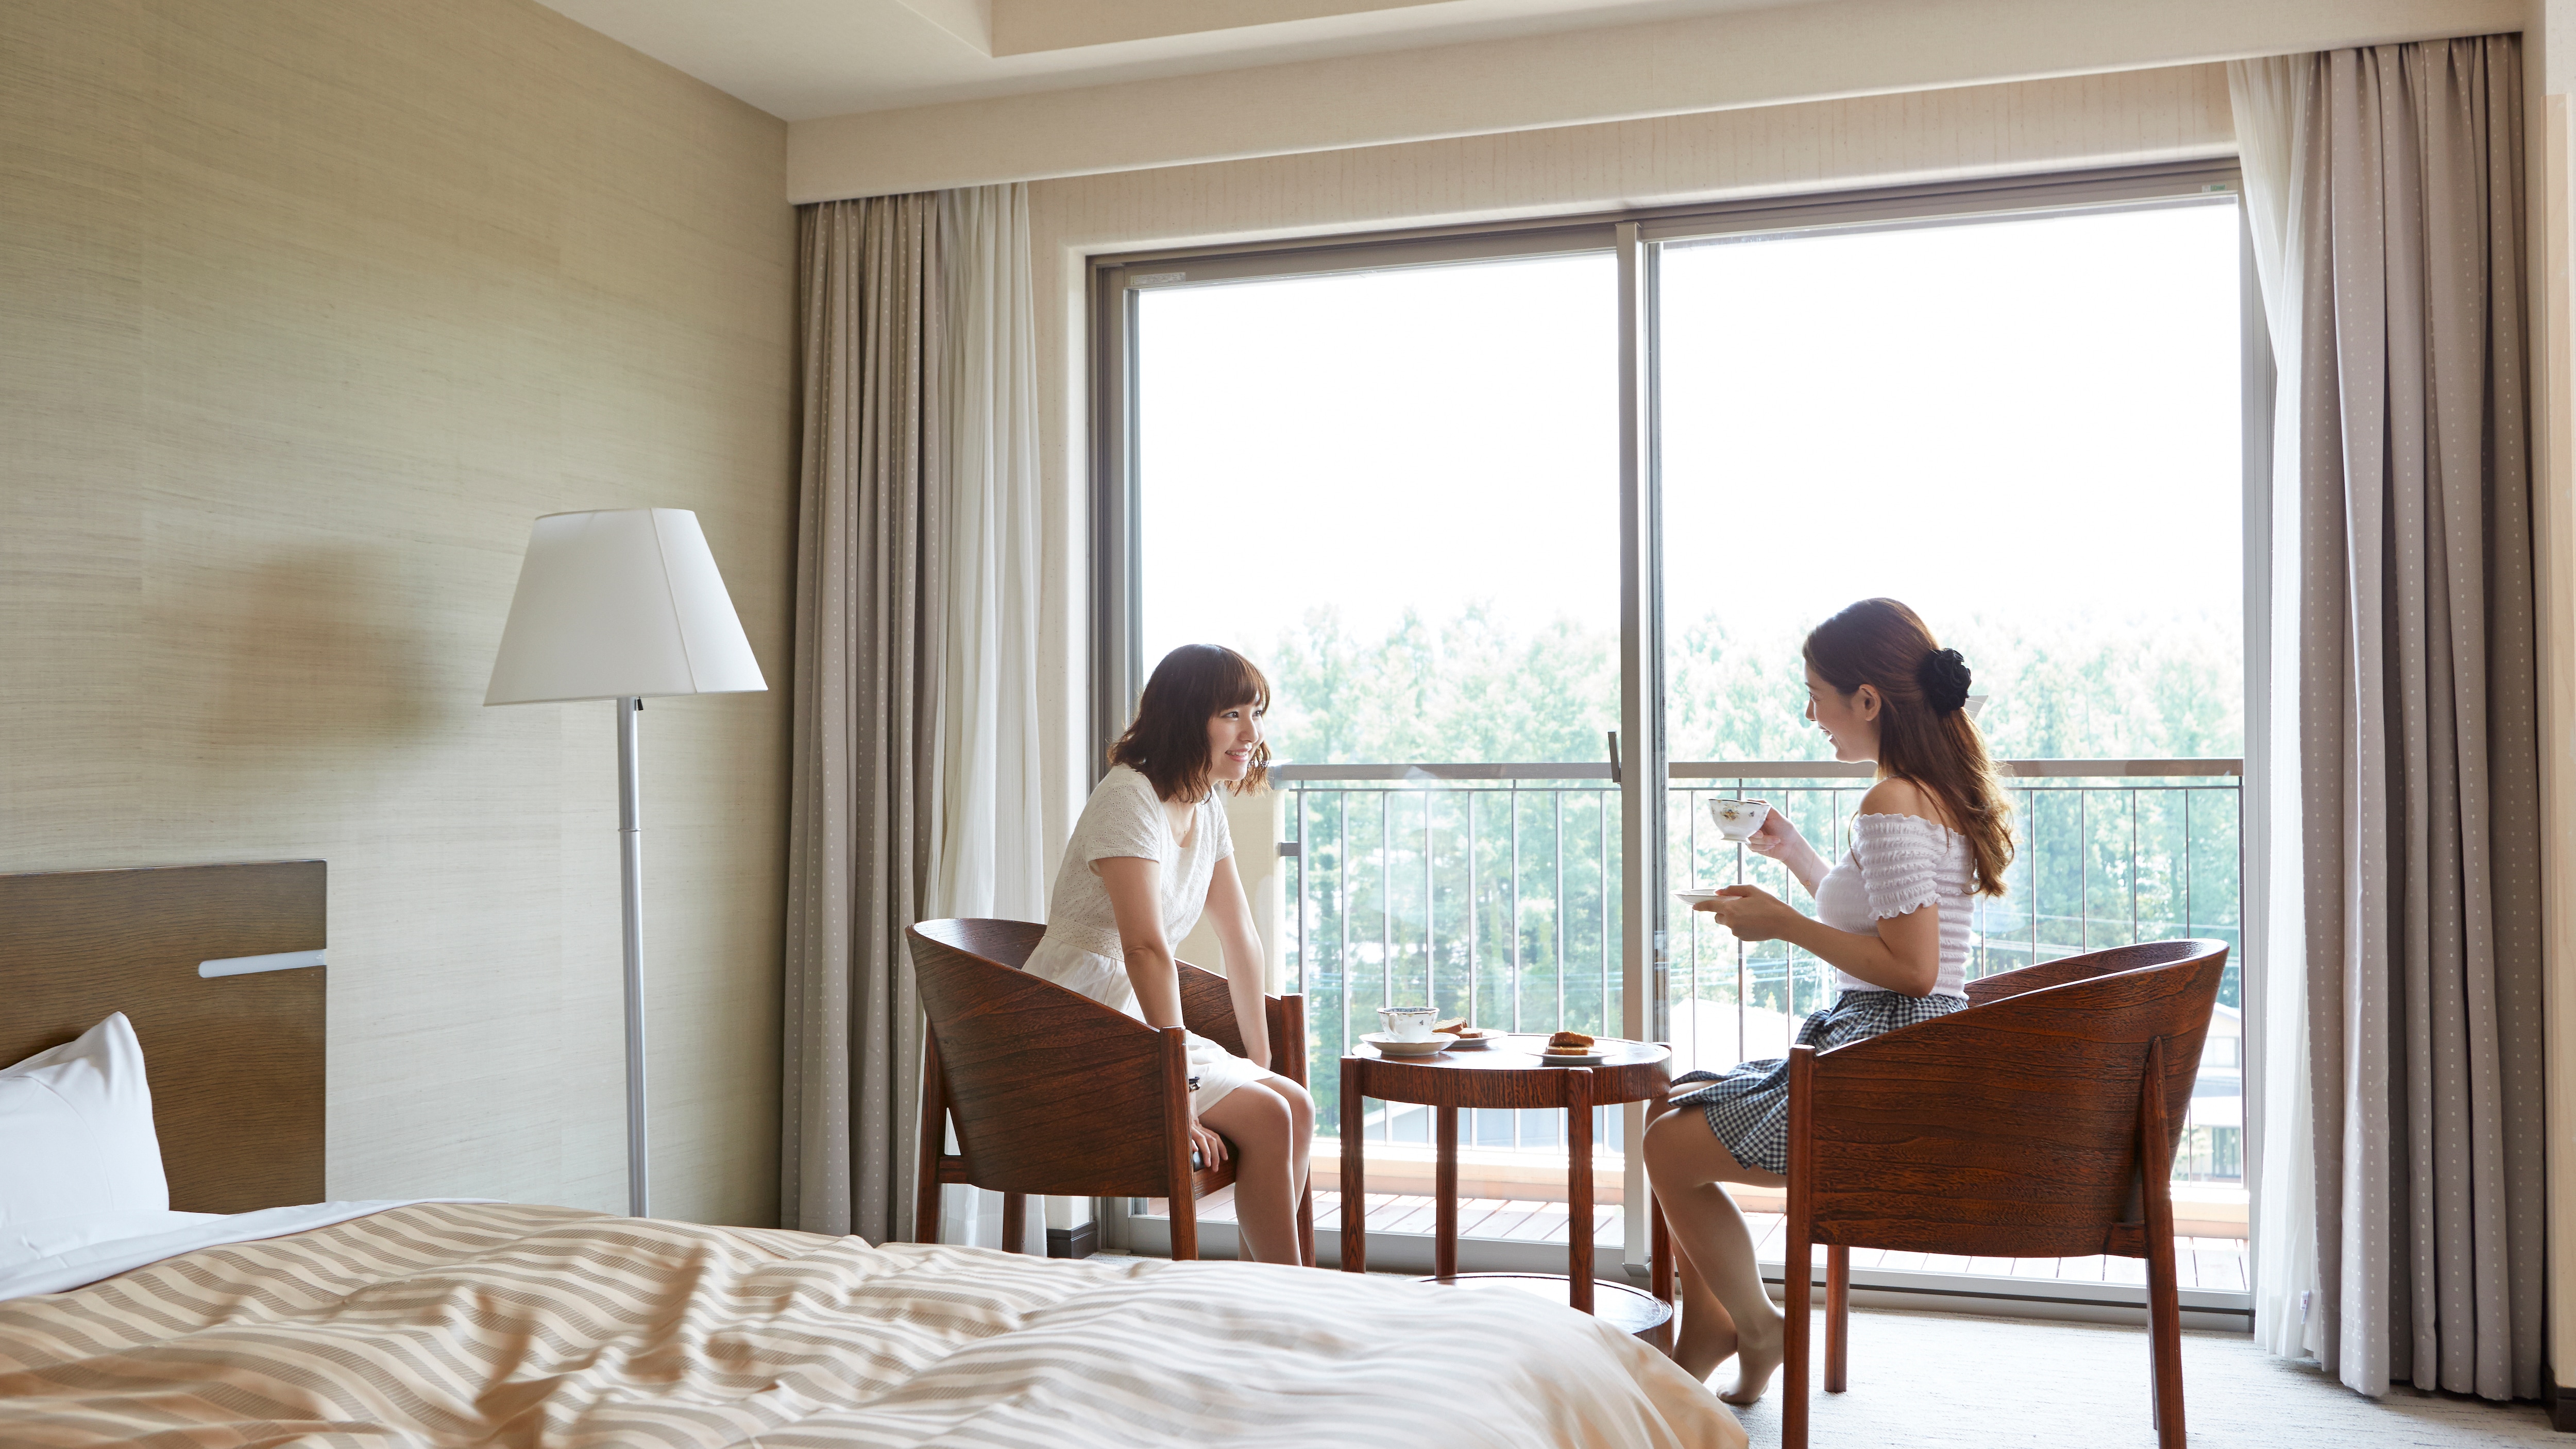 You can see Mt. Fuji from your room | All rooms have Mt. Fuji view (image)